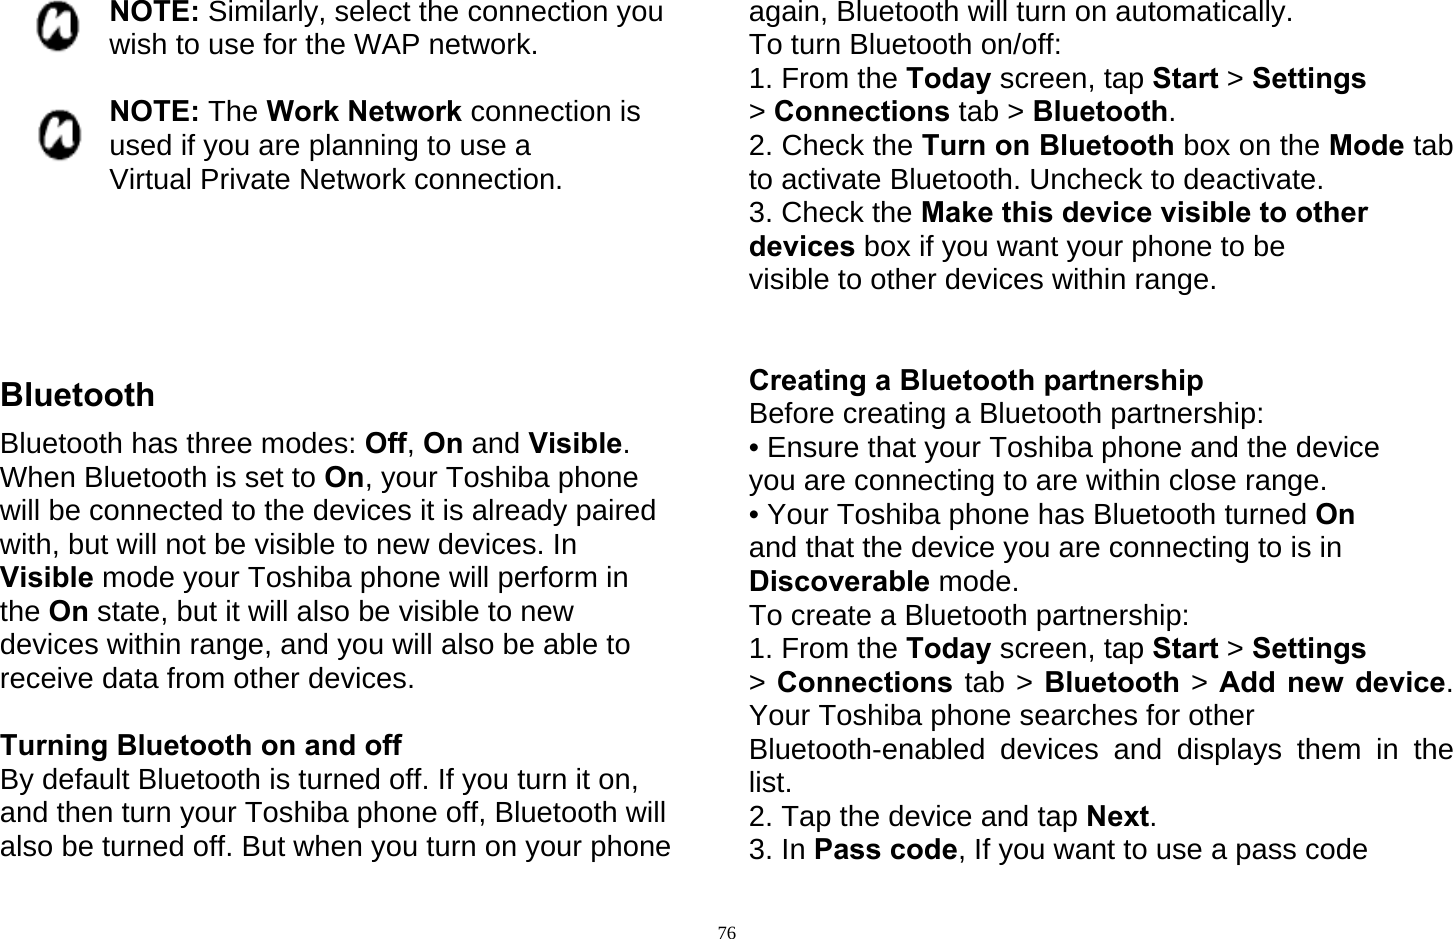   76NOTE: Similarly, select the connection you wish to use for the WAP network.  NOTE: The Work Network connection is used if you are planning to use a Virtual Private Network connection.      Bluetooth Bluetooth has three modes: Off, On and Visible. When Bluetooth is set to On, your Toshiba phone will be connected to the devices it is already paired with, but will not be visible to new devices. In Visible mode your Toshiba phone will perform in the On state, but it will also be visible to new devices within range, and you will also be able to receive data from other devices.  Turning Bluetooth on and off By default Bluetooth is turned off. If you turn it on, and then turn your Toshiba phone off, Bluetooth will also be turned off. But when you turn on your phone again, Bluetooth will turn on automatically. To turn Bluetooth on/off: 1. From the Today screen, tap Start &gt; Settings &gt; Connections tab &gt; Bluetooth. 2. Check the Turn on Bluetooth box on the Mode tab to activate Bluetooth. Uncheck to deactivate. 3. Check the Make this device visible to other devices box if you want your phone to be visible to other devices within range.   Creating a Bluetooth partnership Before creating a Bluetooth partnership: • Ensure that your Toshiba phone and the device you are connecting to are within close range. • Your Toshiba phone has Bluetooth turned On and that the device you are connecting to is in Discoverable mode. To create a Bluetooth partnership: 1. From the Today screen, tap Start &gt; Settings &gt; Connections tab &gt; Bluetooth &gt; Add new device. Your Toshiba phone searches for other   Bluetooth-enabled devices and displays them in the list. 2. Tap the device and tap Next. 3. In Pass code, If you want to use a pass code 